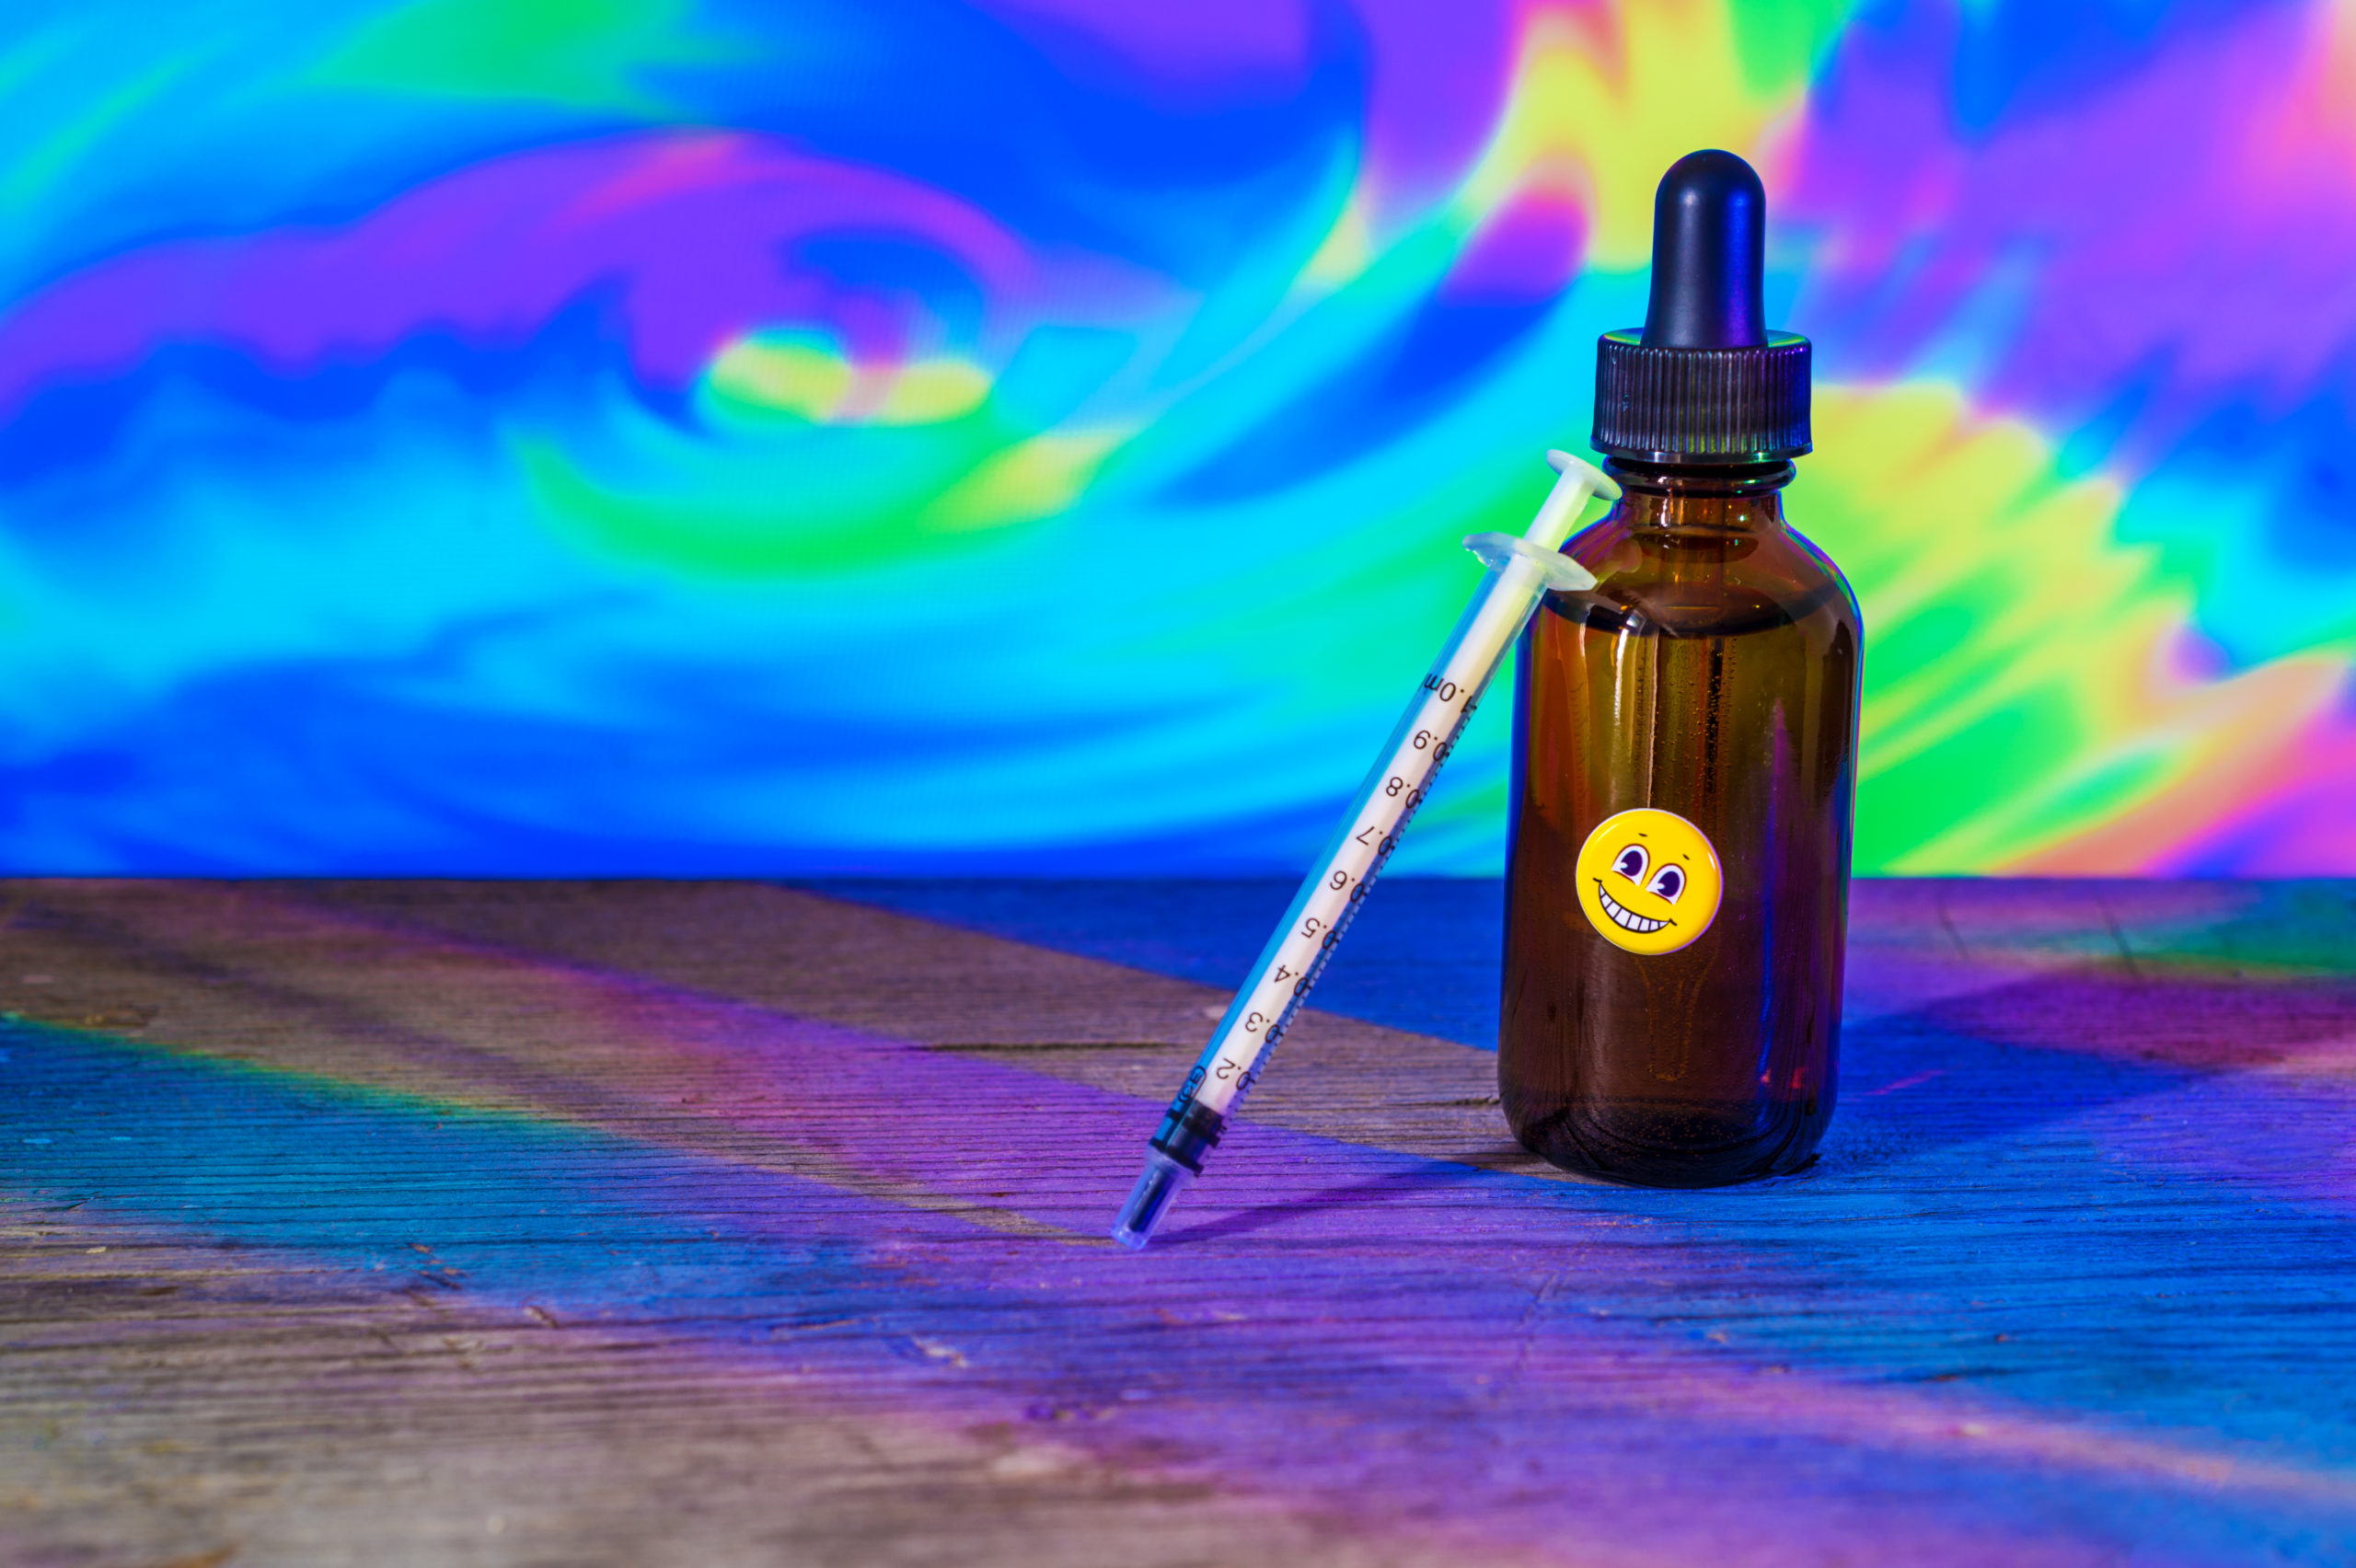 Psychedelic Company Reportedly Develops LSD Antidote